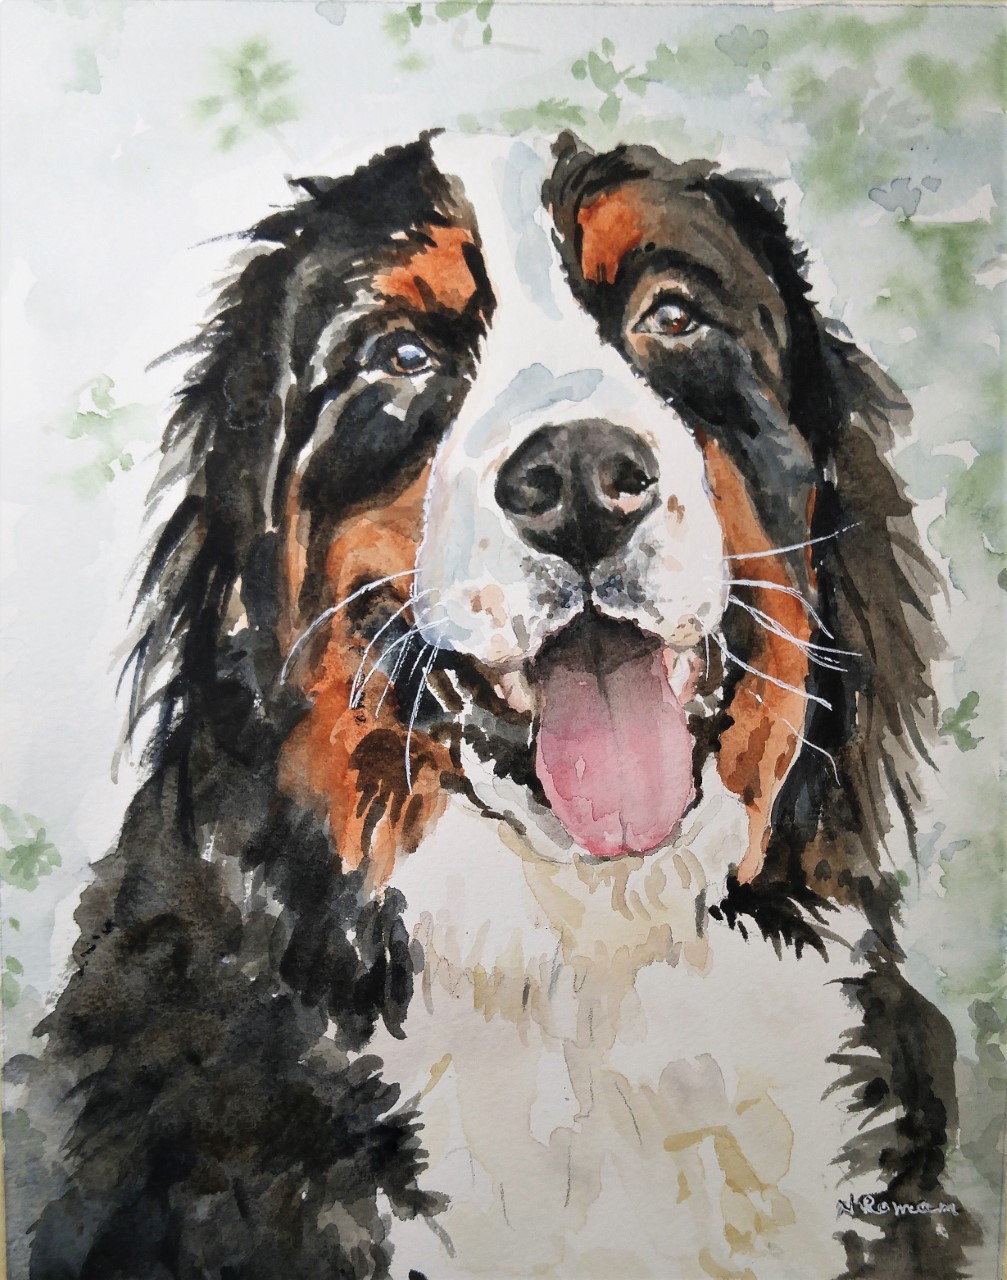 A watercolor painted version of a Burmese mountain dog, done professionally